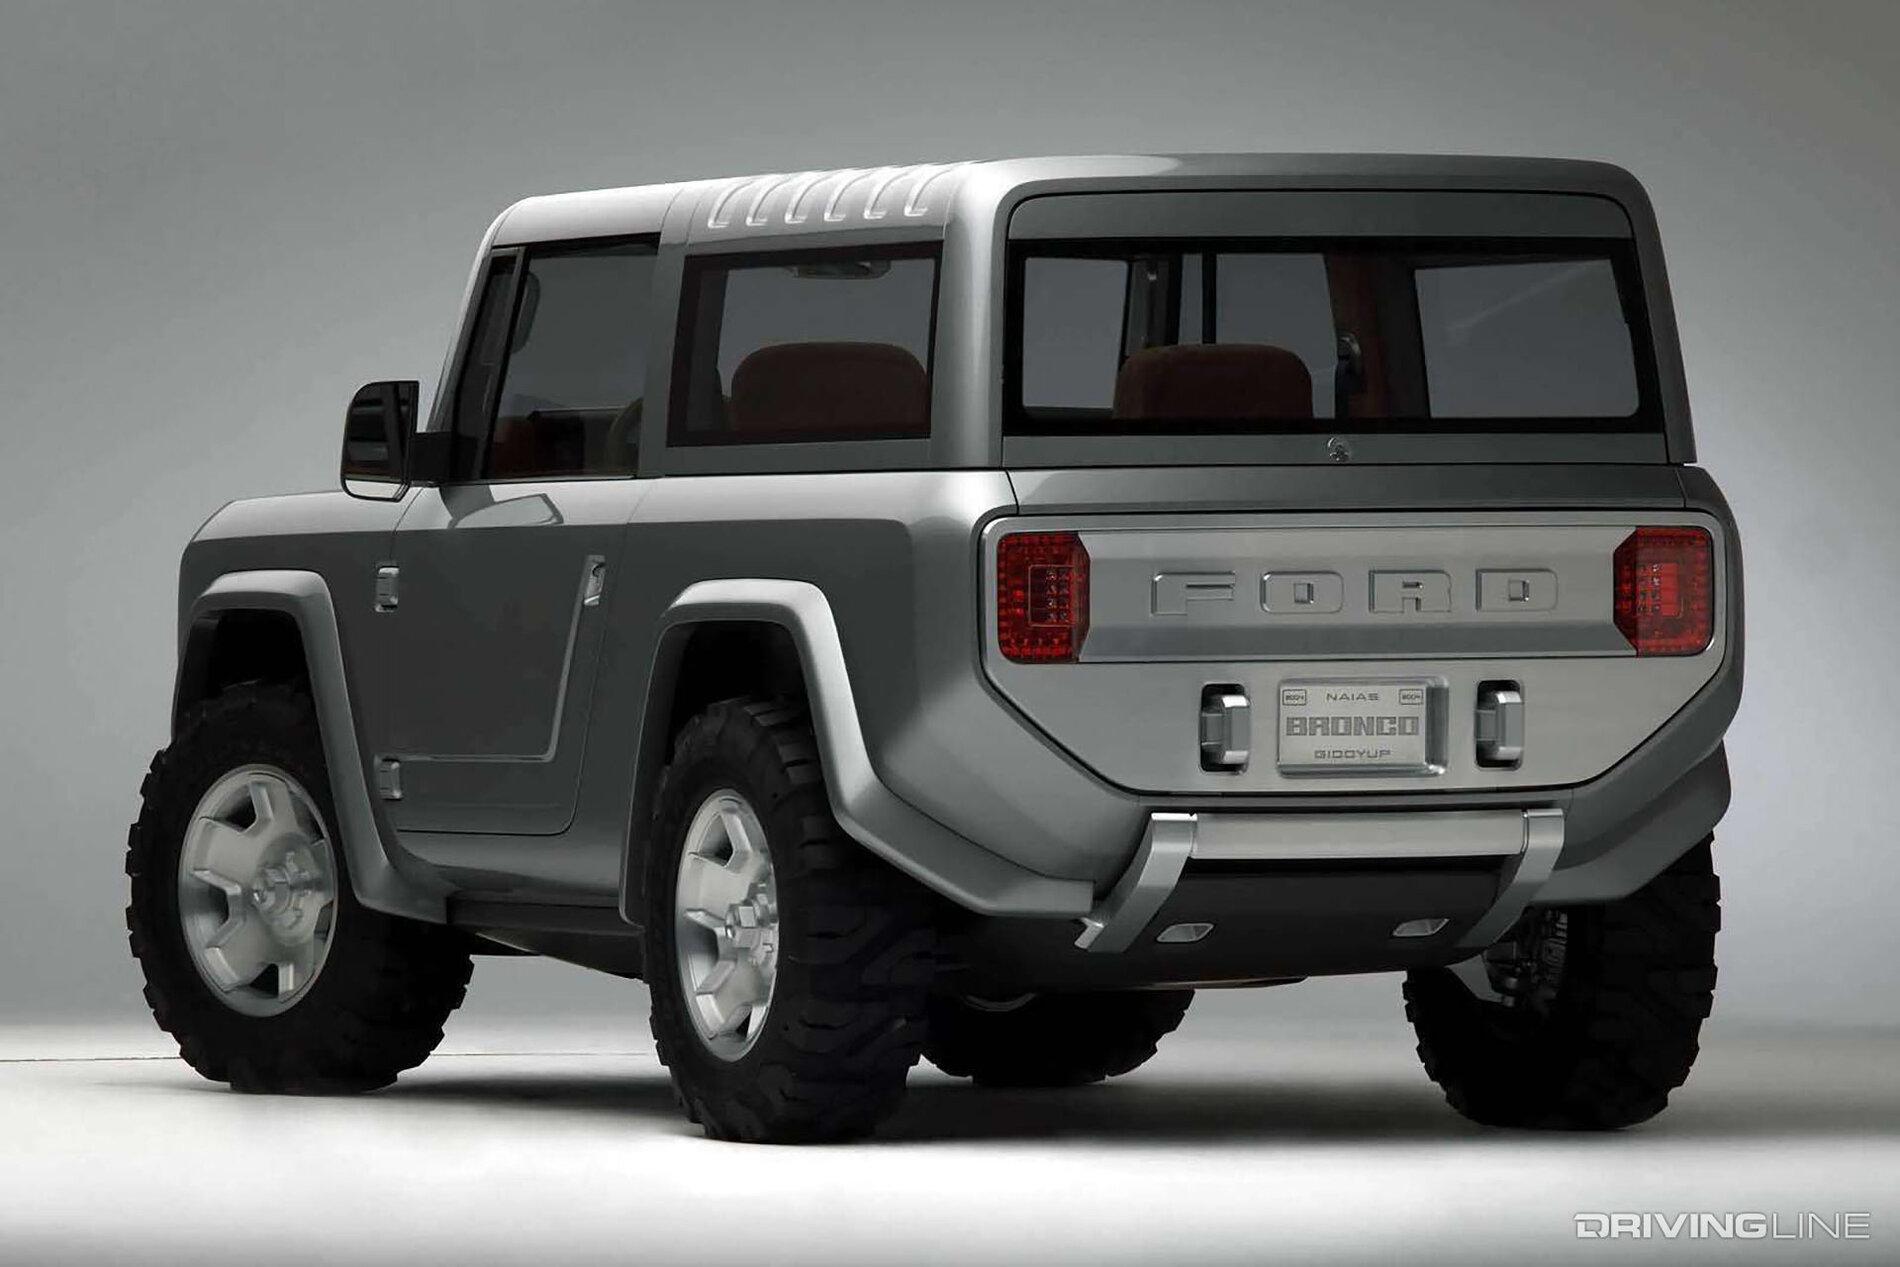 Ford Bronco Bronco Concept Design: What if it ended up like this? 1598286261017